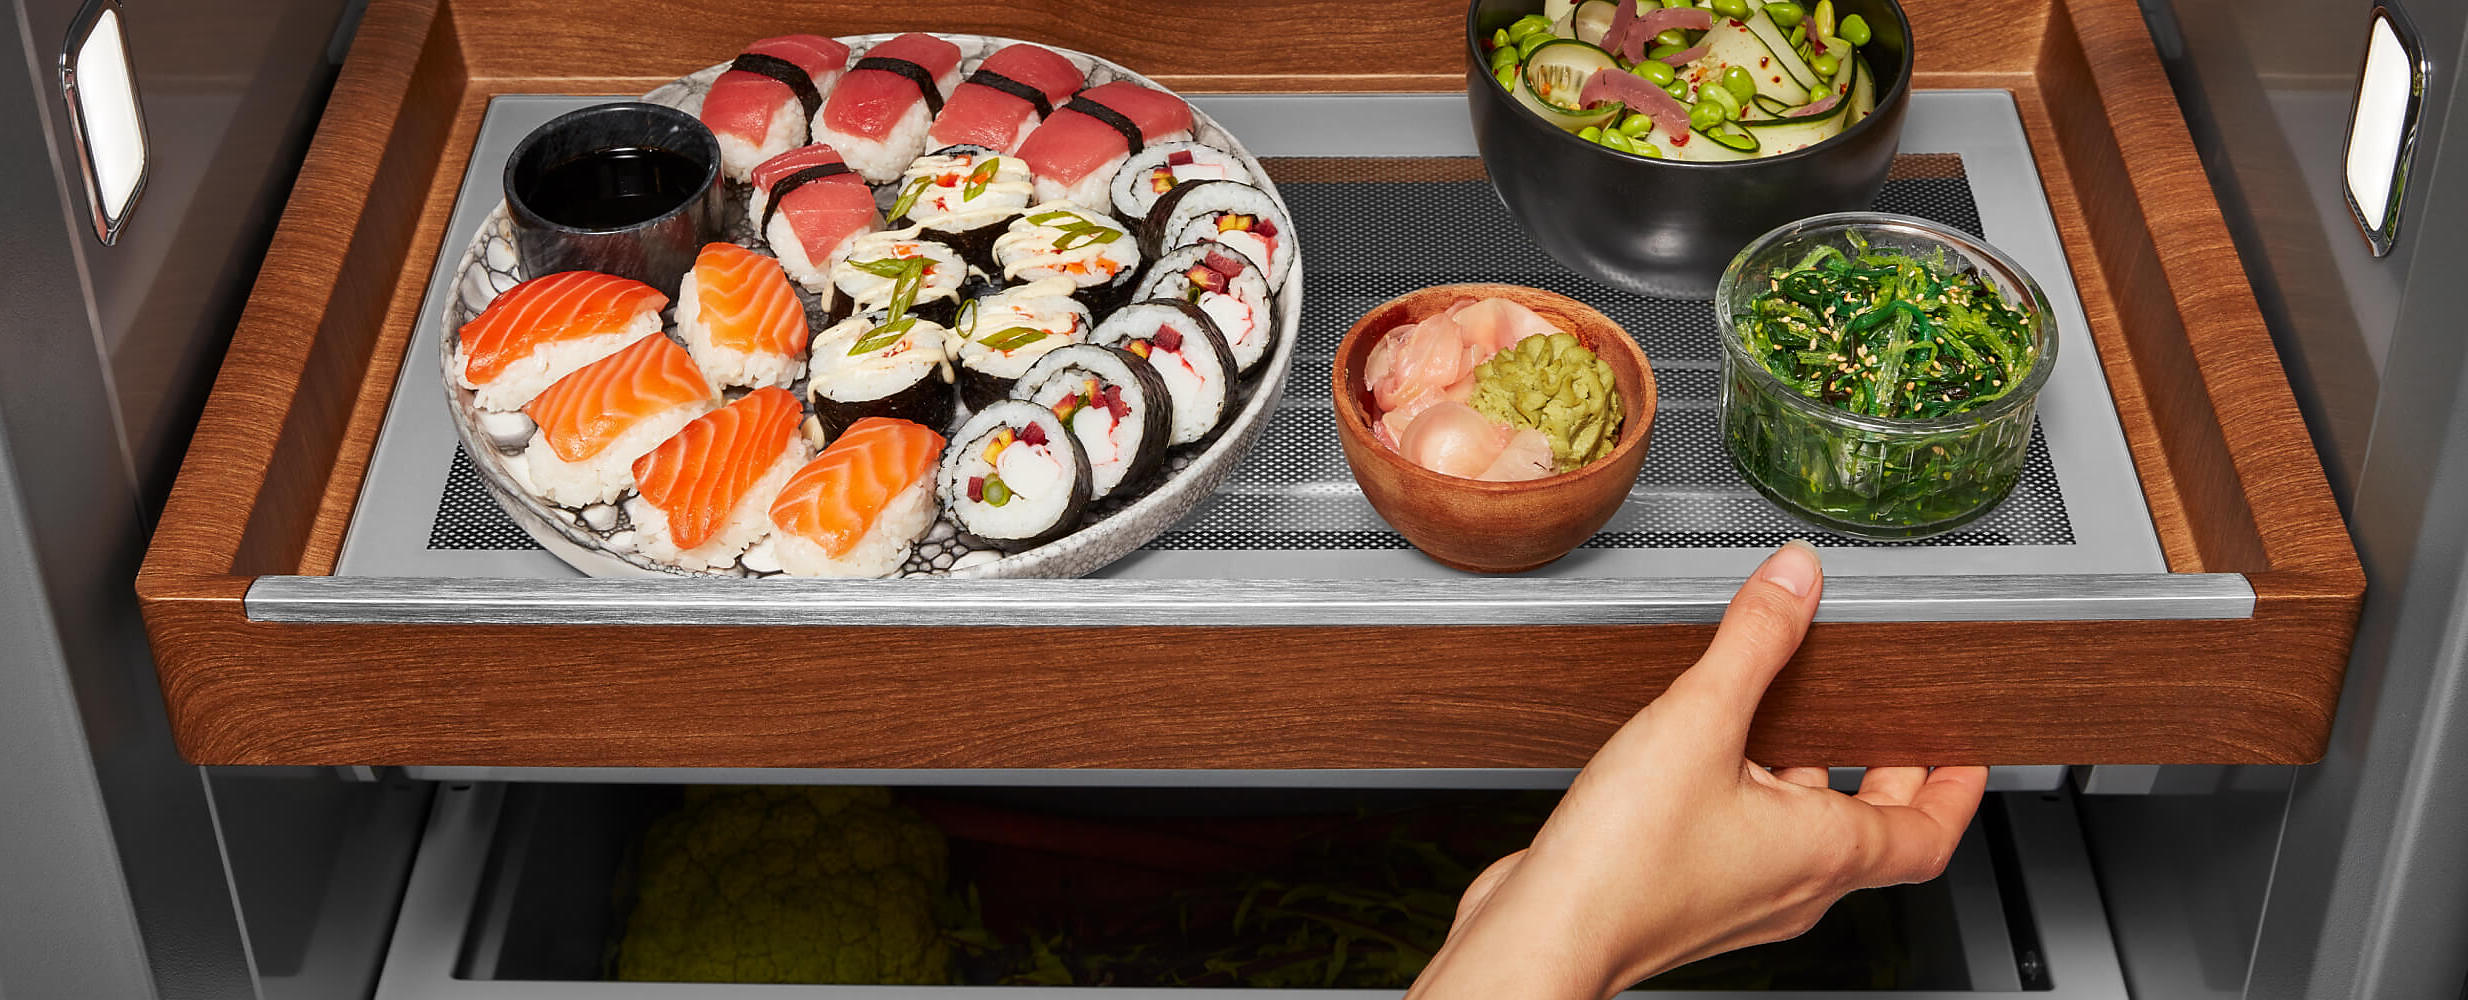 Sliding Storage Tray in a 42" KitchenAid® Built-In Side-by-Side Refrigerator holding sushi and other foods